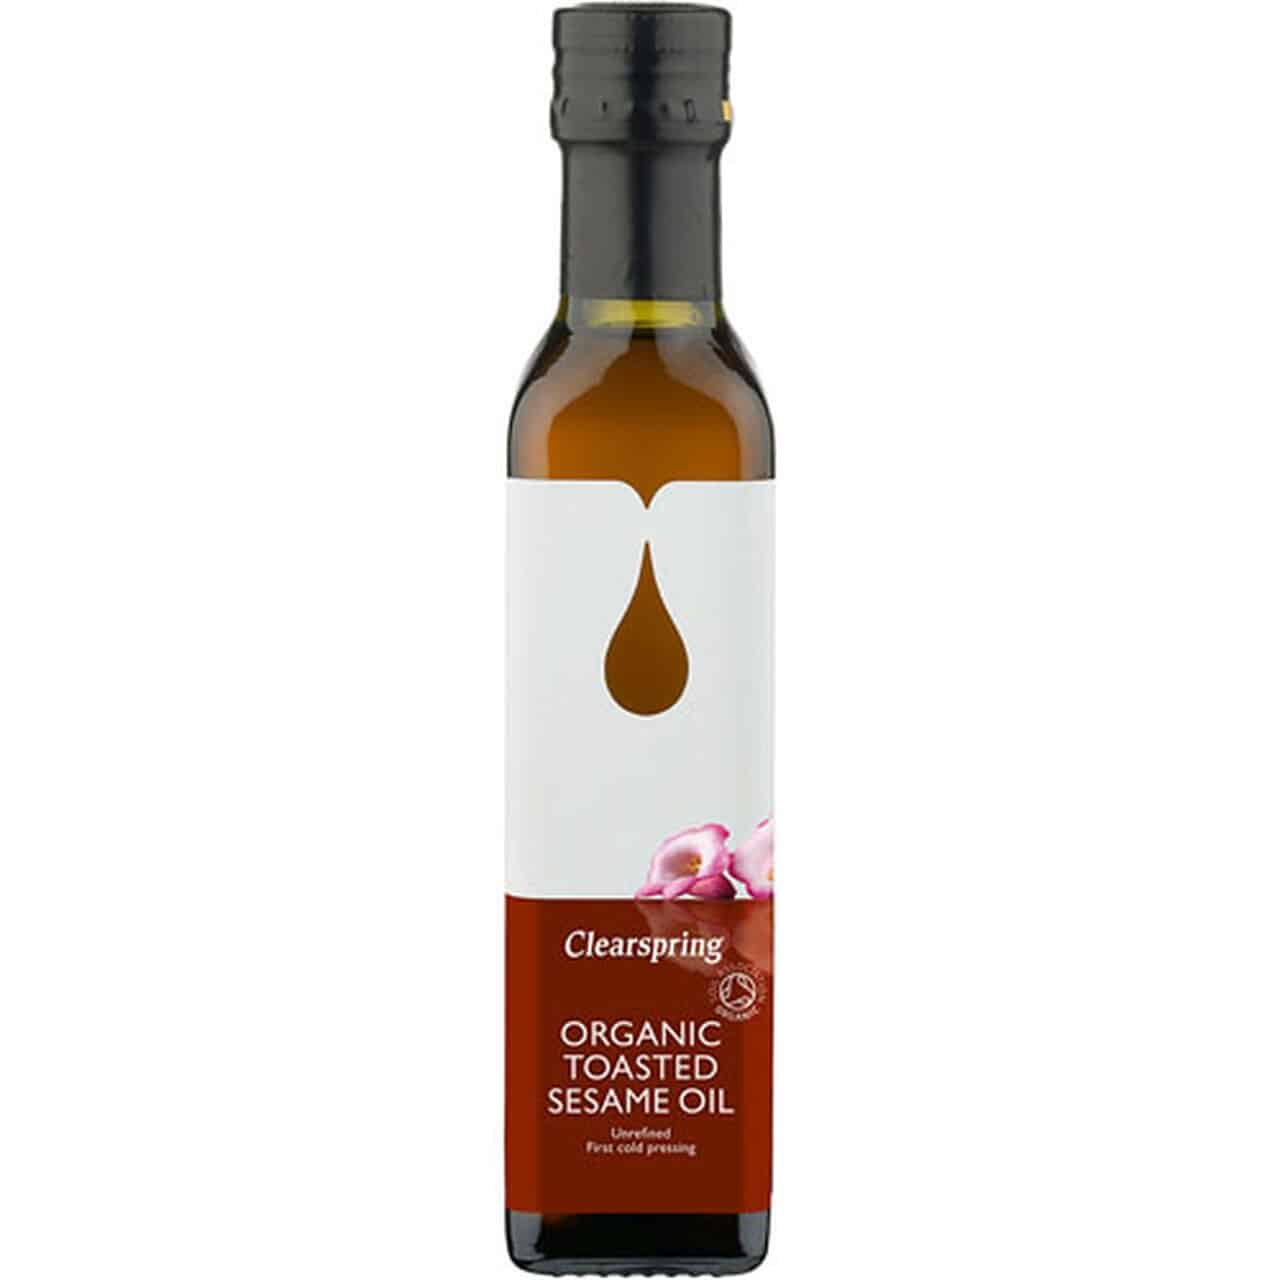 Clearspring-Organic-Toasted-Sesame-Oil